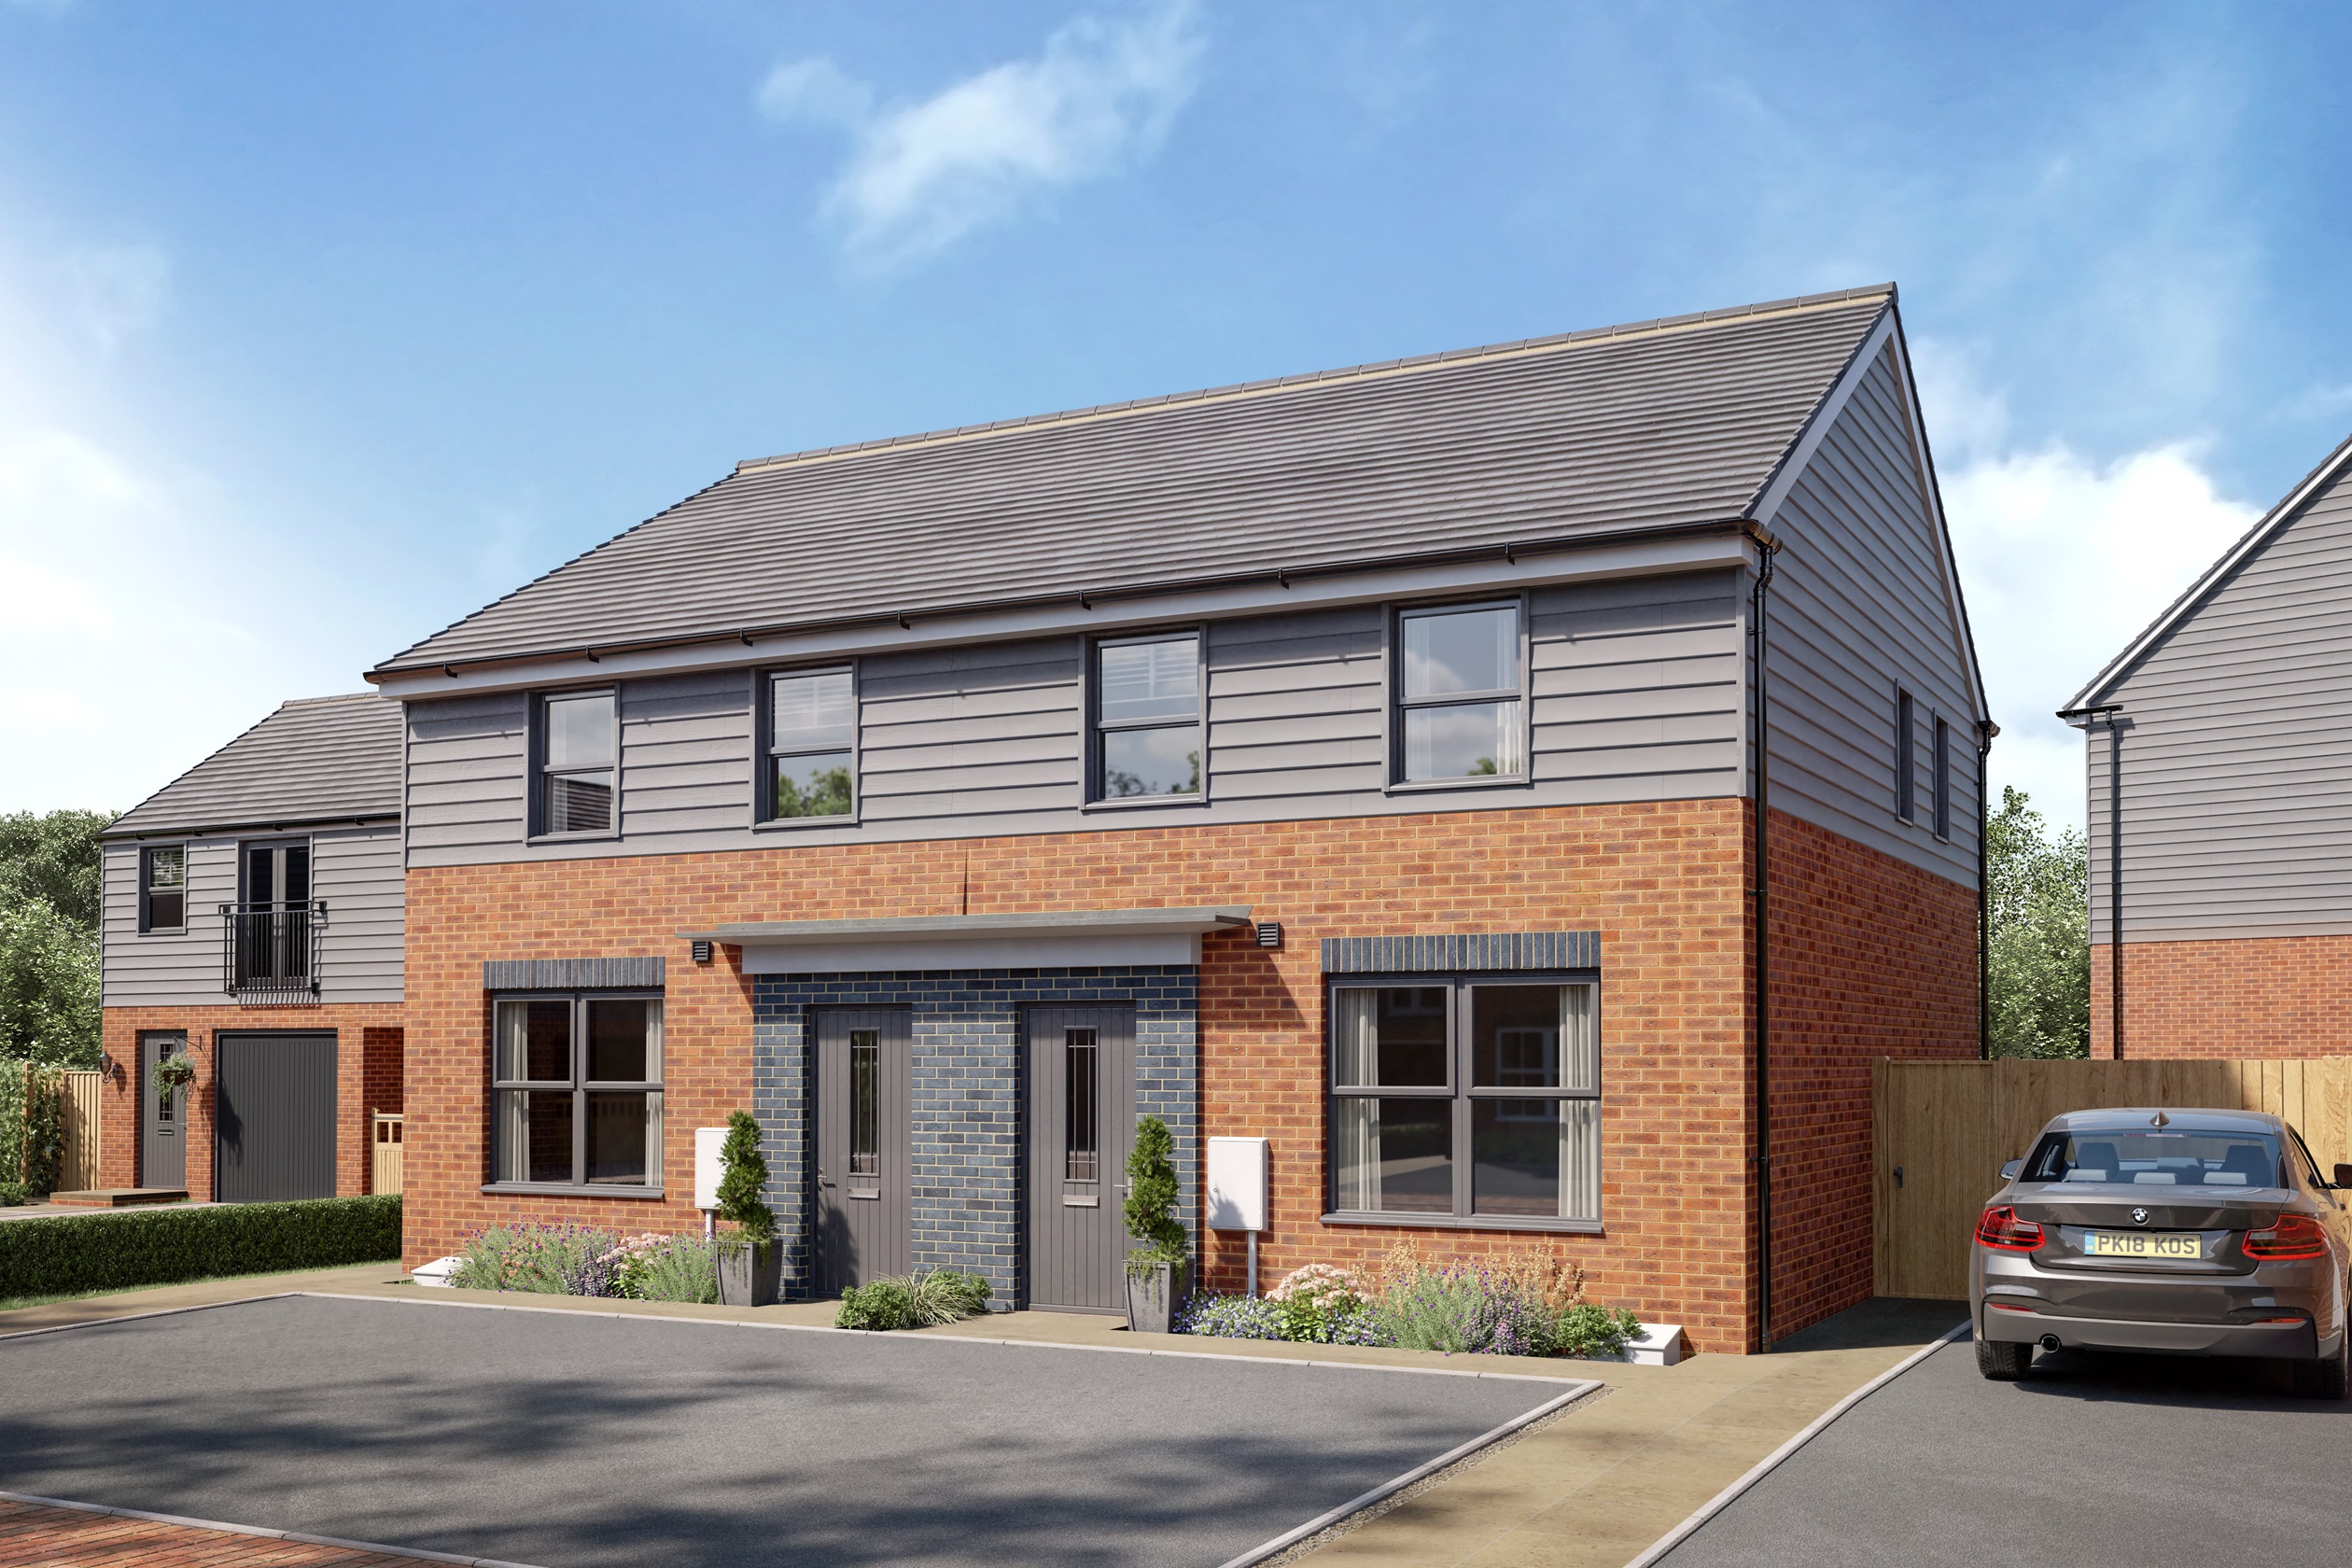 Property 1 of 10. Sydney Place Archford Contemporary CGI